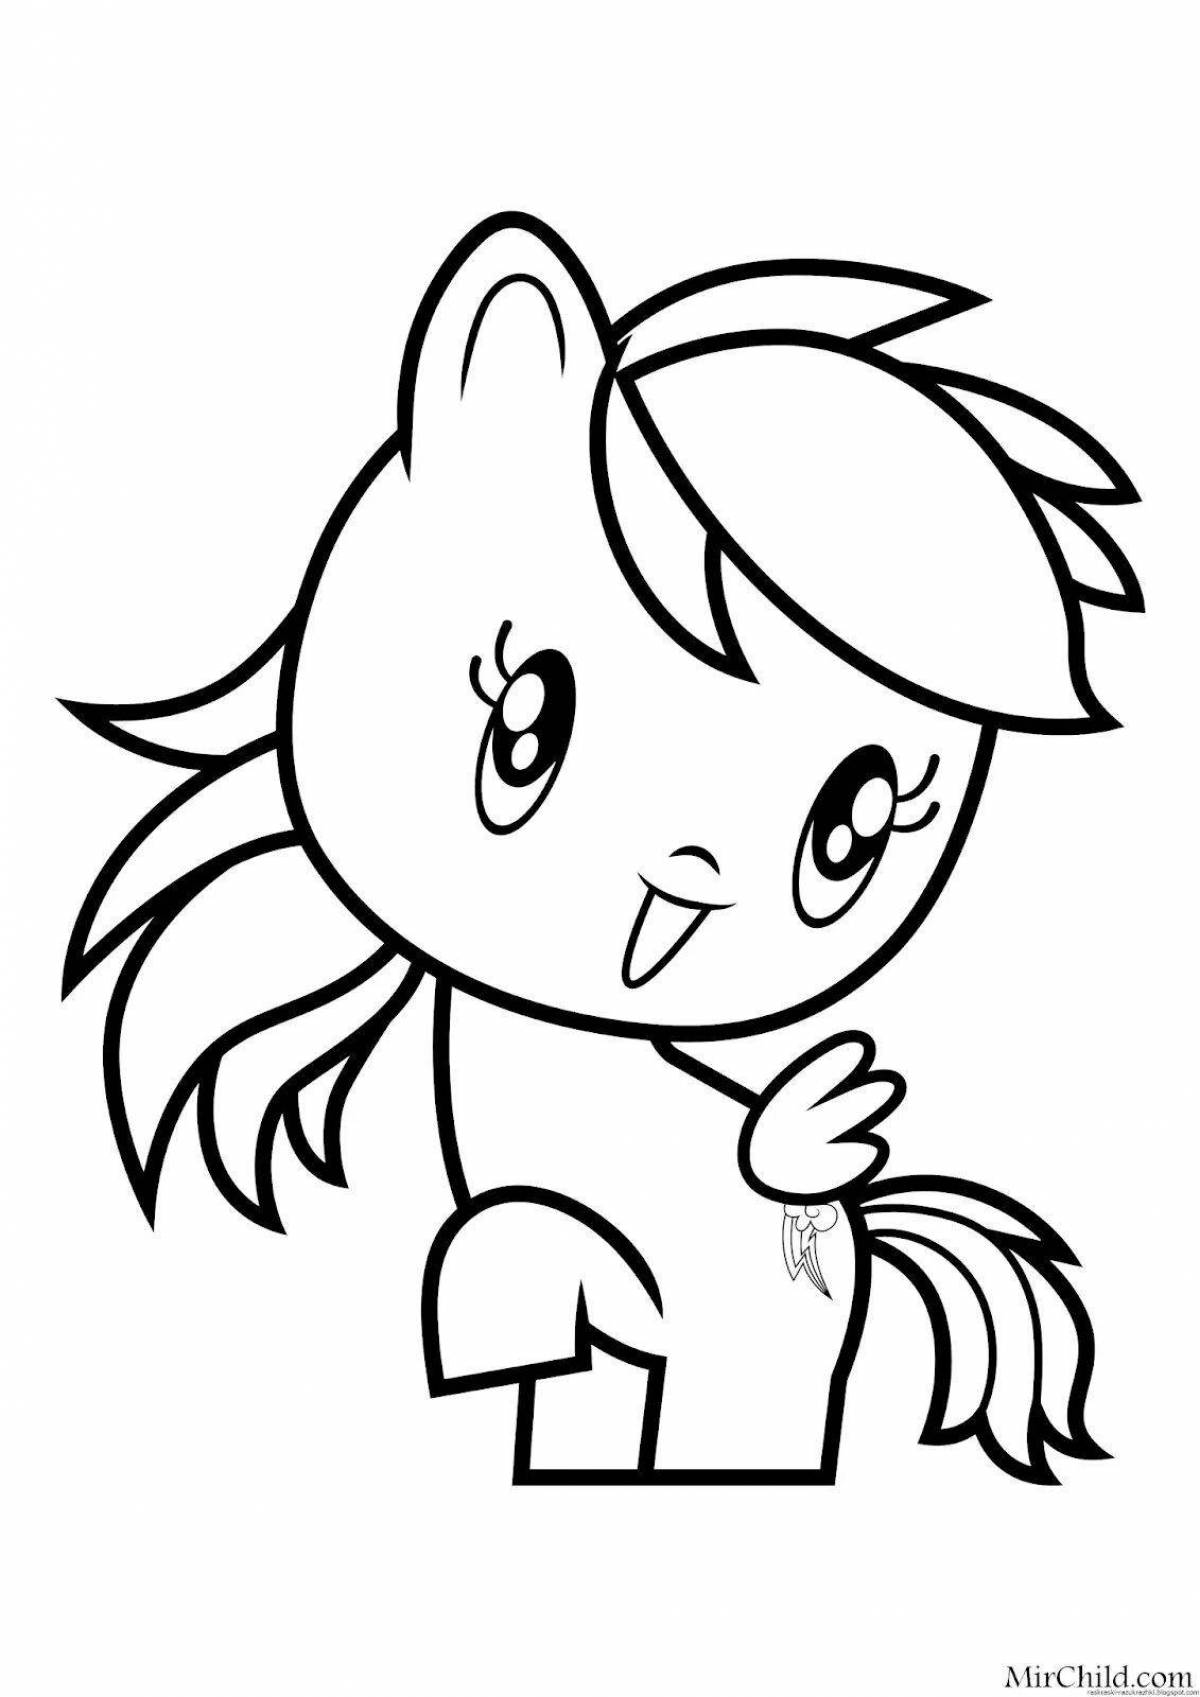 Cute cute pony coloring book for kids